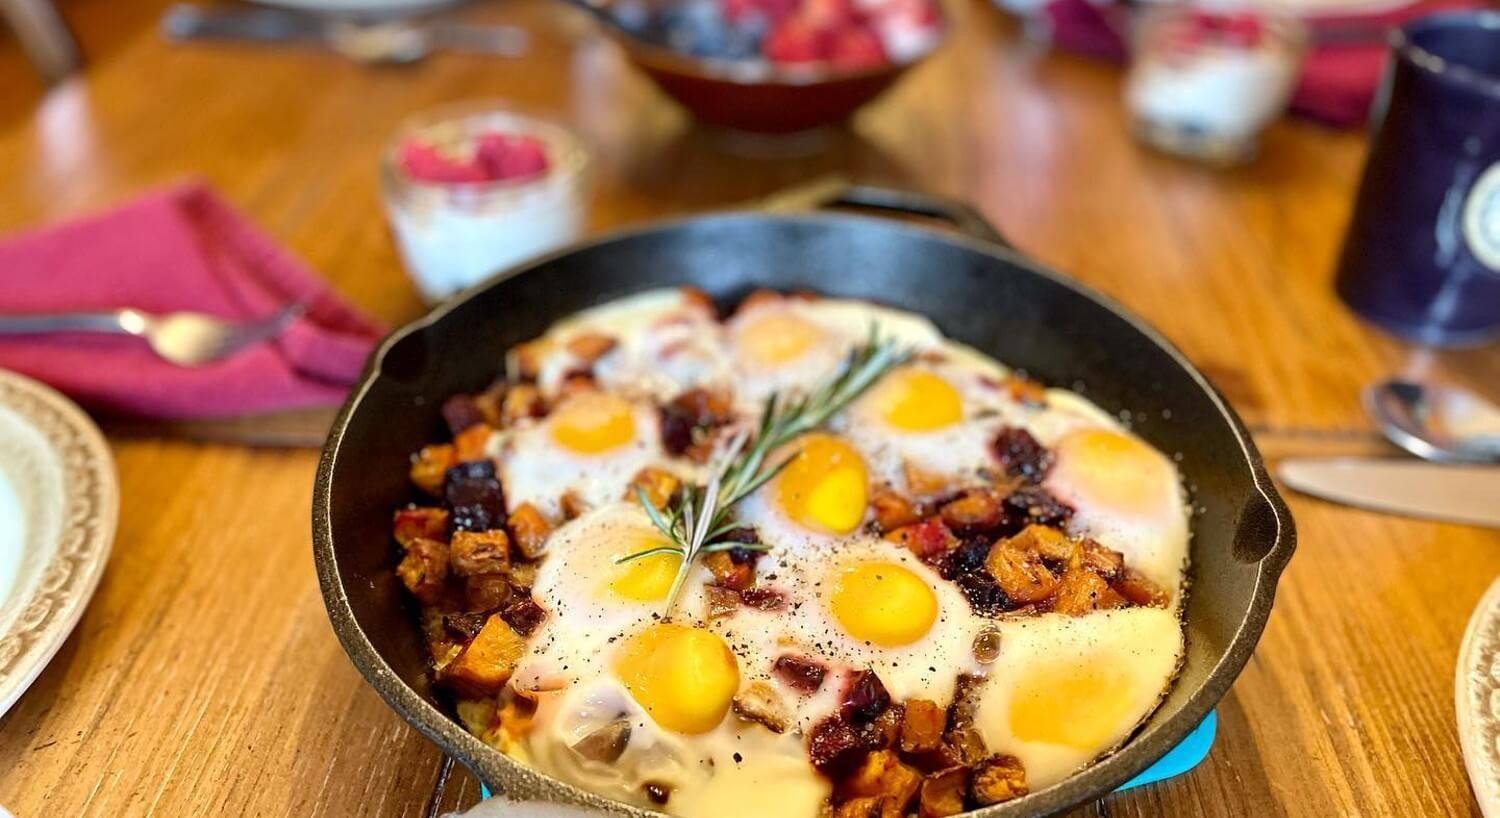 Dining table with egg and potato breakfast dish in a cast iron pan with a bowl of berries